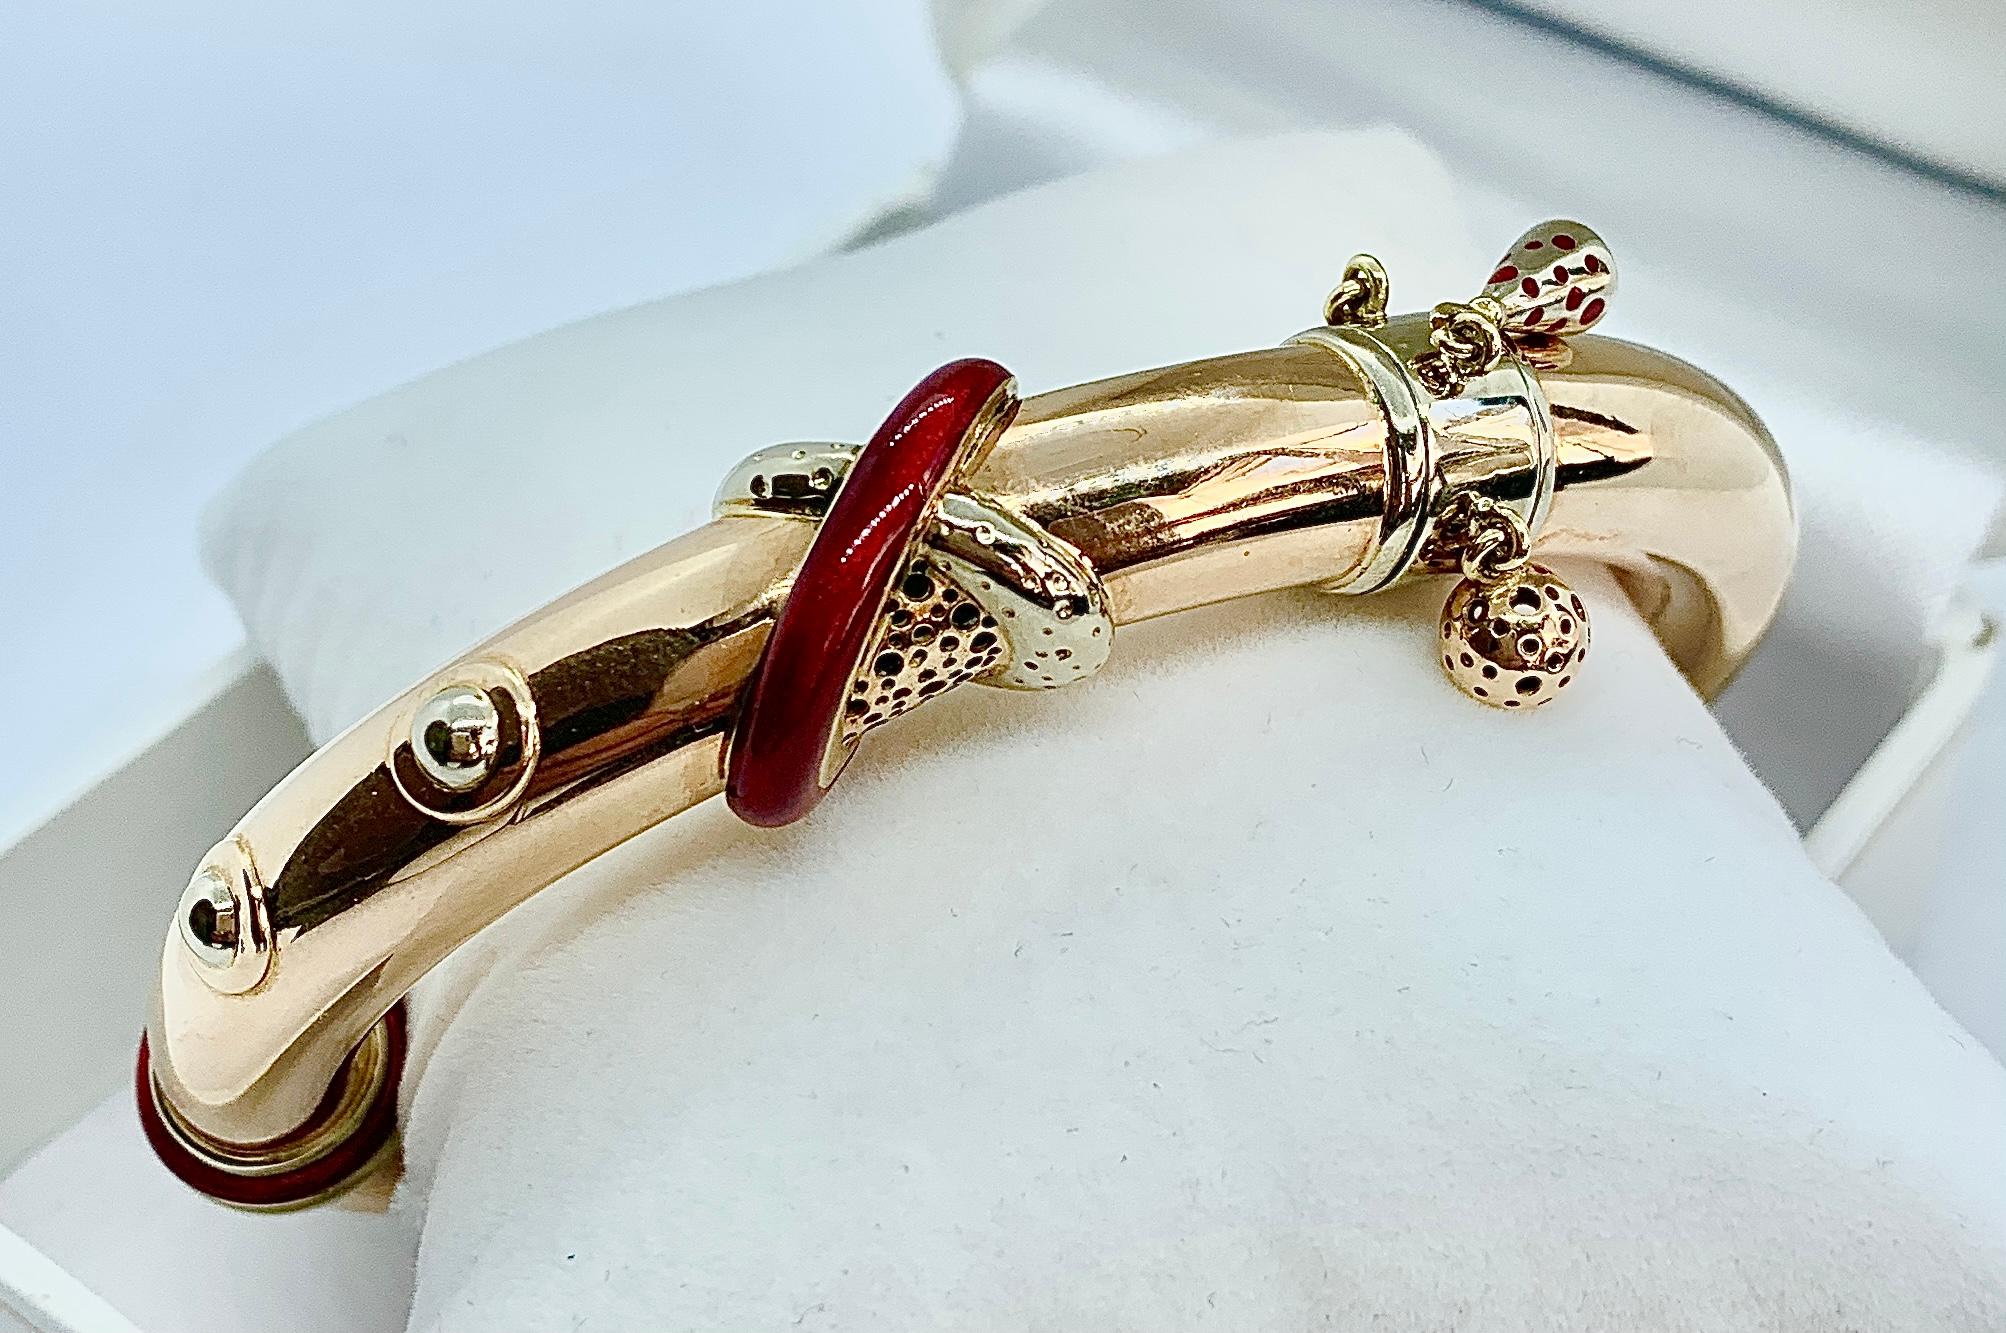 Gorgeous La Nouvelle Bague Bangle Bracelet. Made in 18K Yellow Gold with red enamel accents as well three charms. Please view the video in the listing to see the movement of the charms and how the bracelet opens and closes. Will fit up to a 6 inch